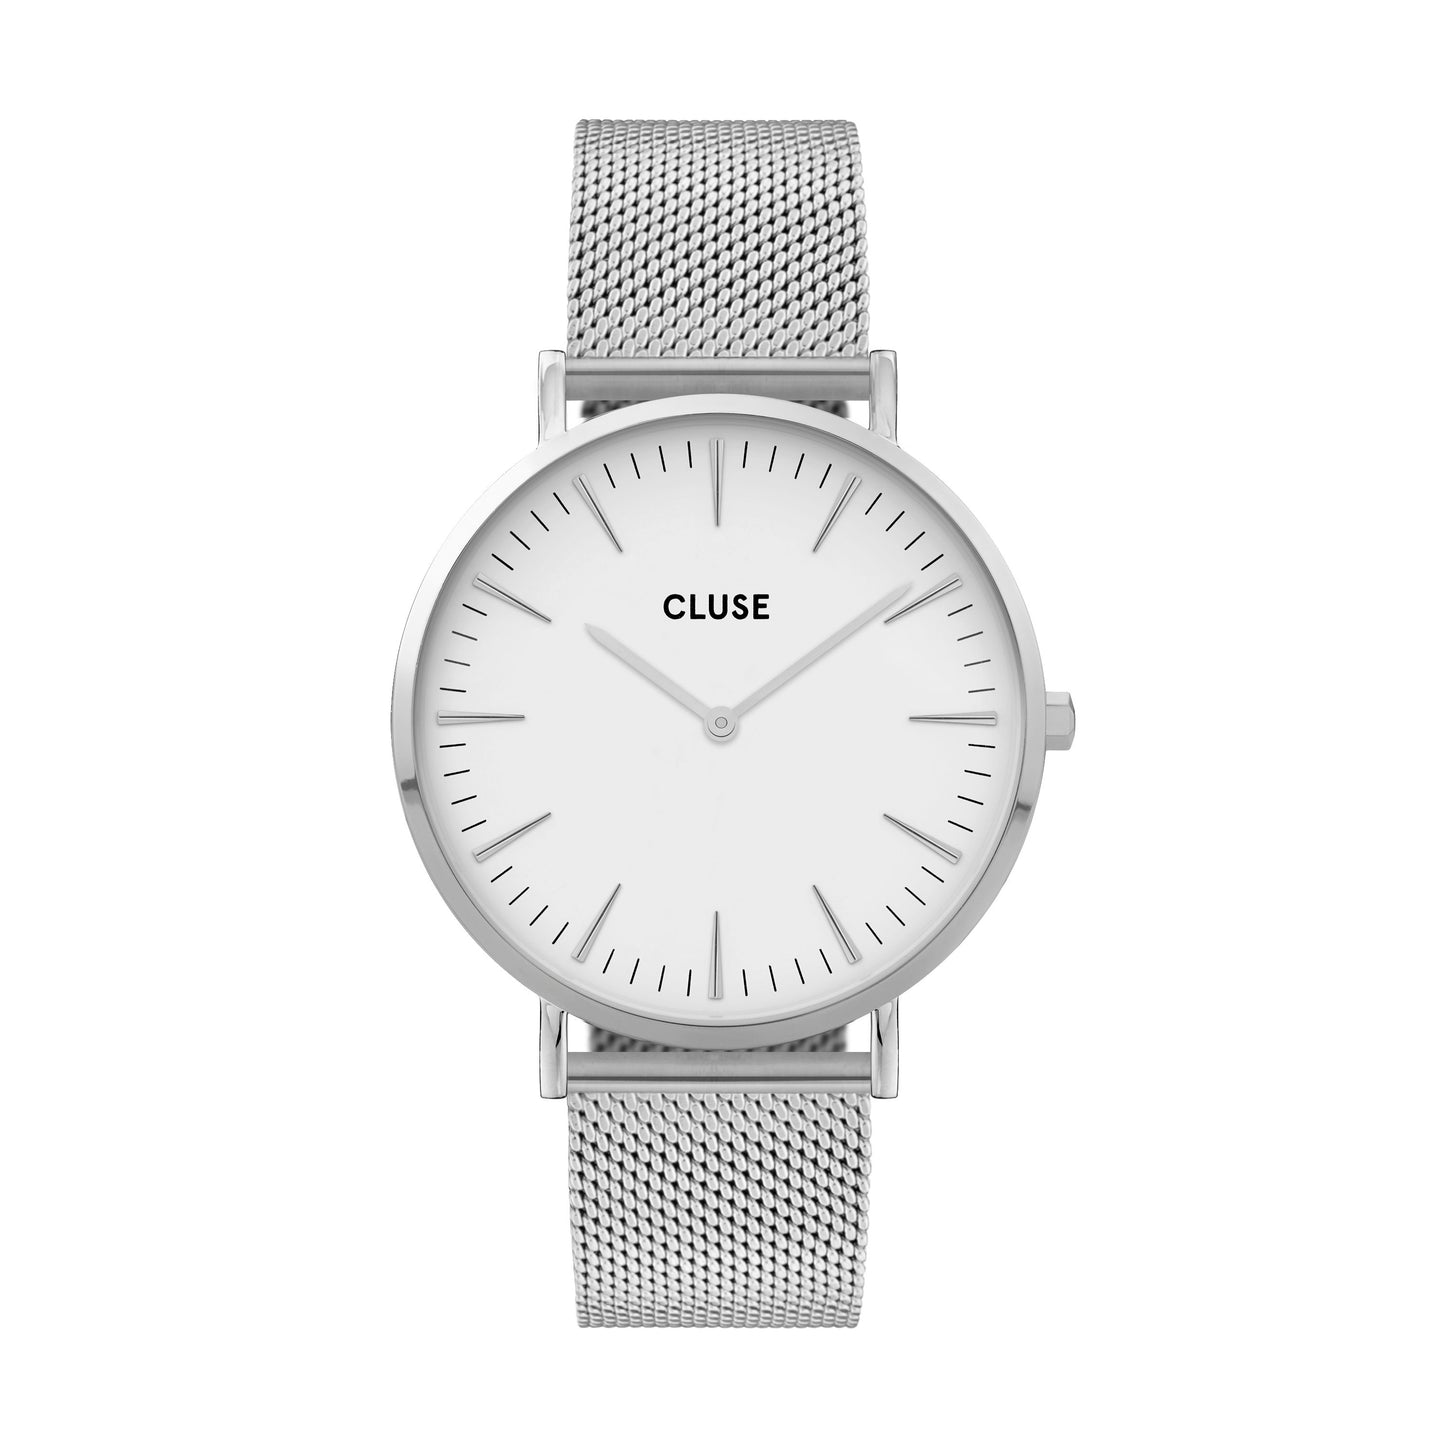 CLUSE SILVER BOHO CHIC WATCH